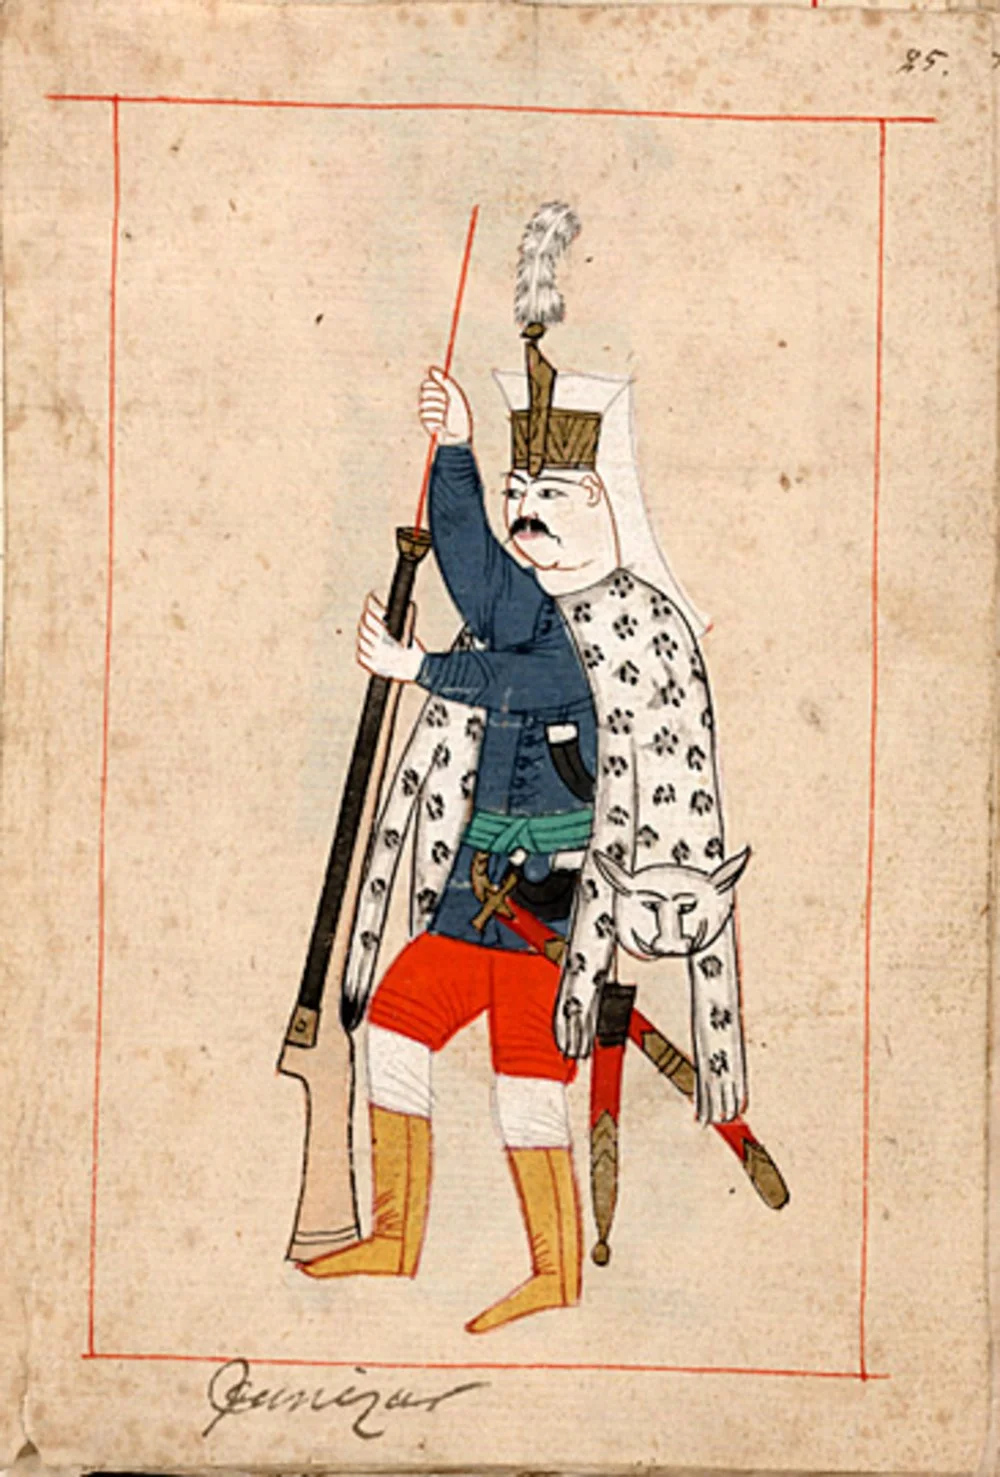 Janissary From Ralamb Costume Book. Miniatures In Indian Ink With Gouache And Some Gilding. They Were Acquired In Constantinople In 1657-58 By Claes Rålamb Who Led A Swedish Embassy/Alamy